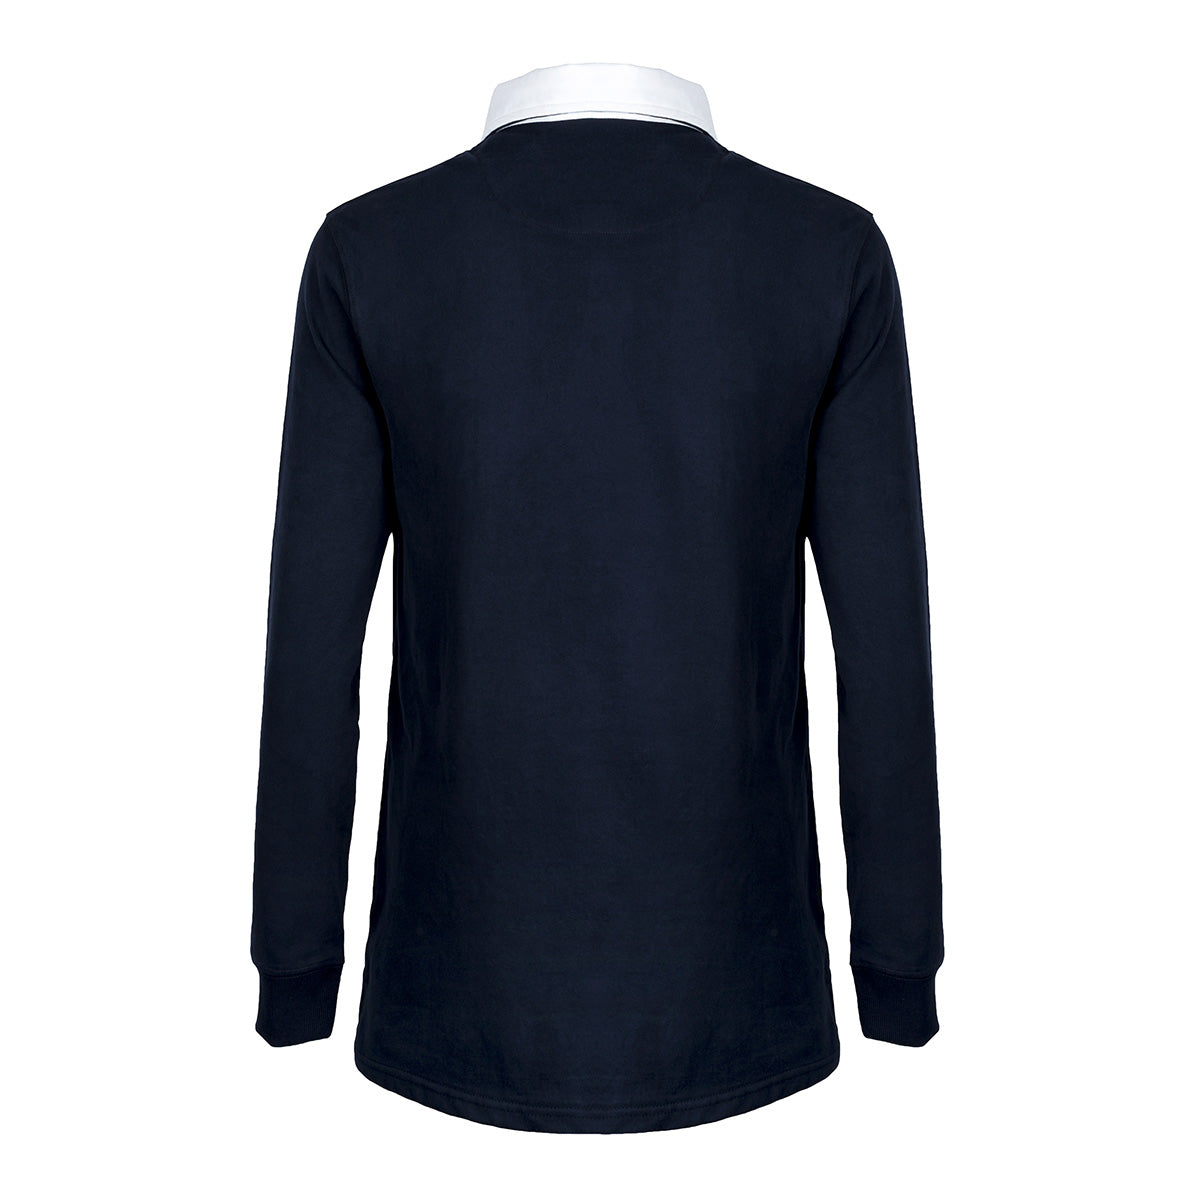 'New Style' Brushed Cotton Rugby Shirt with SOC Logo - Navy Blue